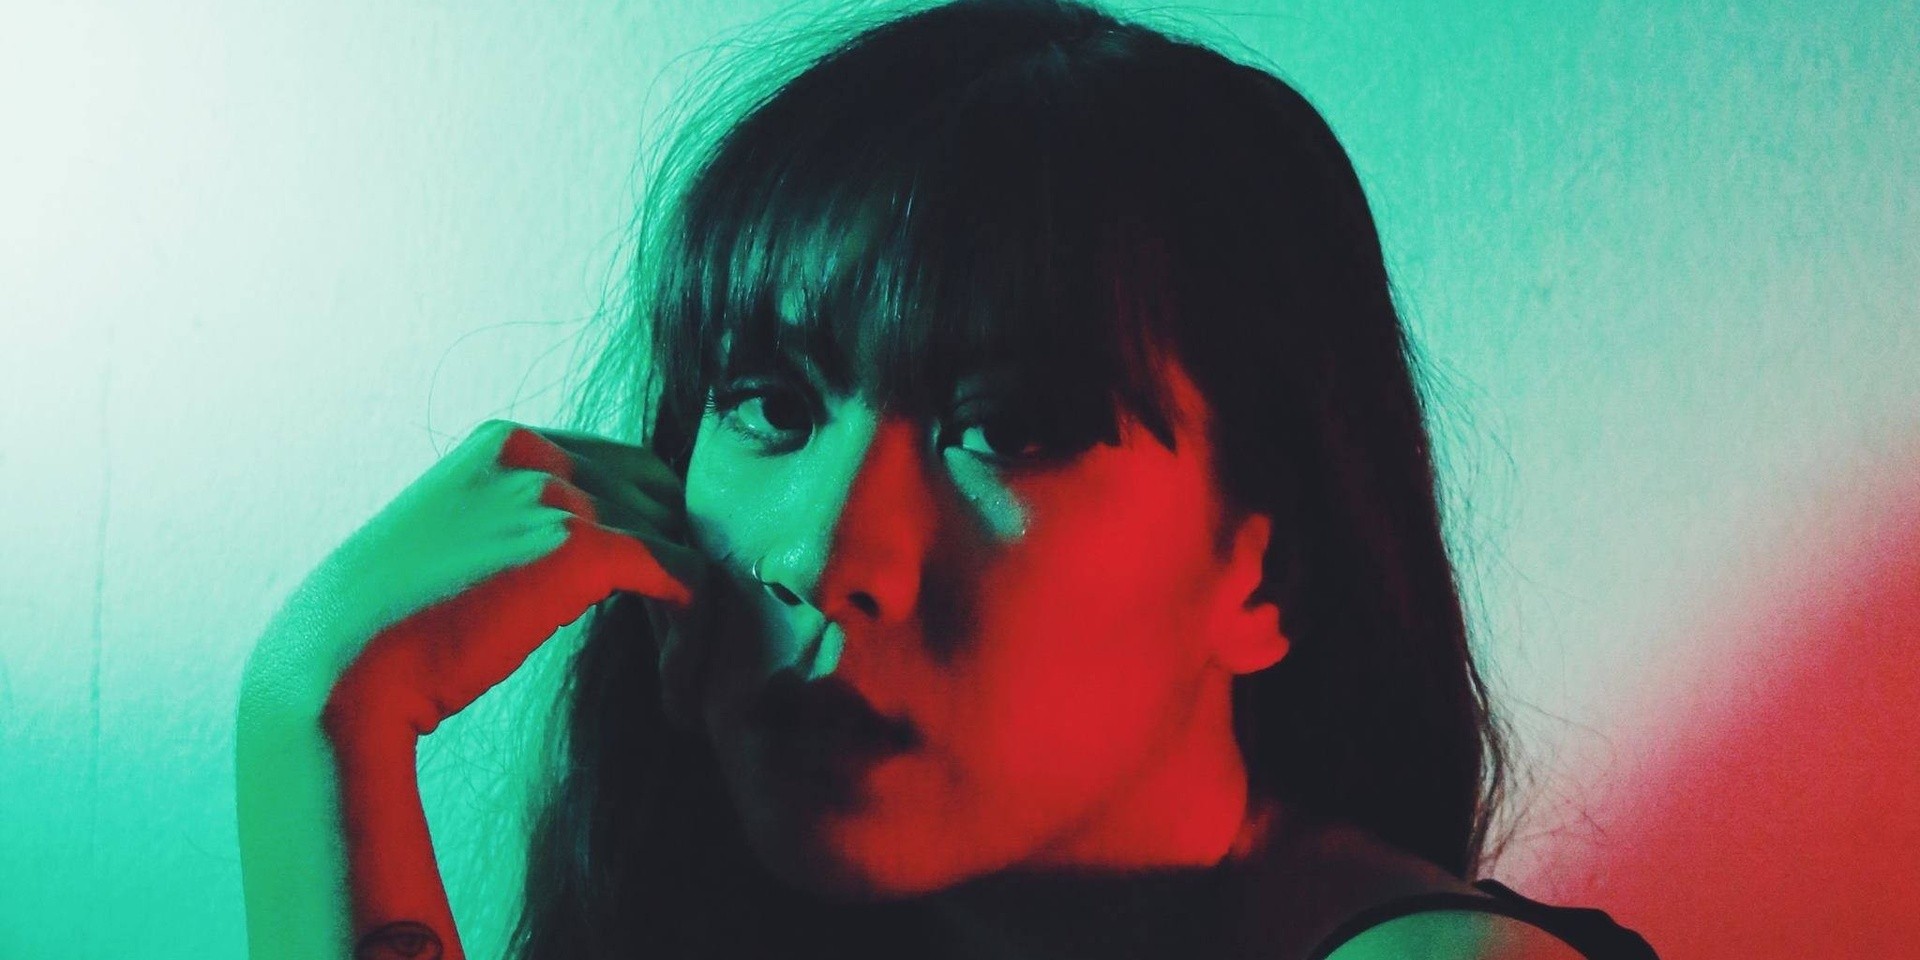 LISTEN: Sam Rui at her best in 'Better', new EP forthcoming